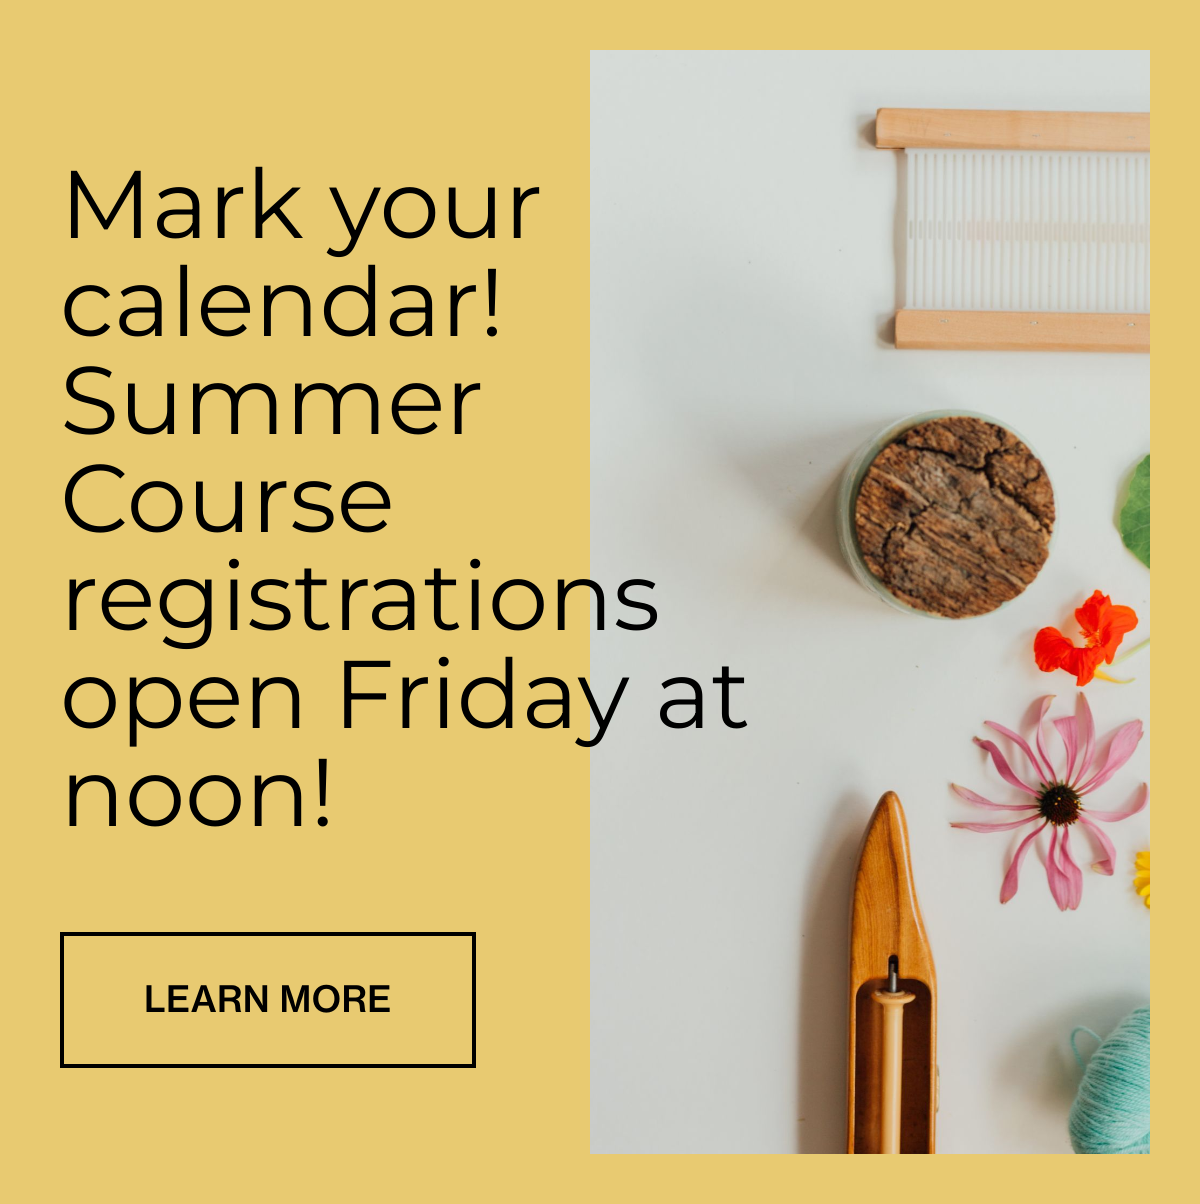 Mark your calendar! Summer course registrations open Friday at noon!